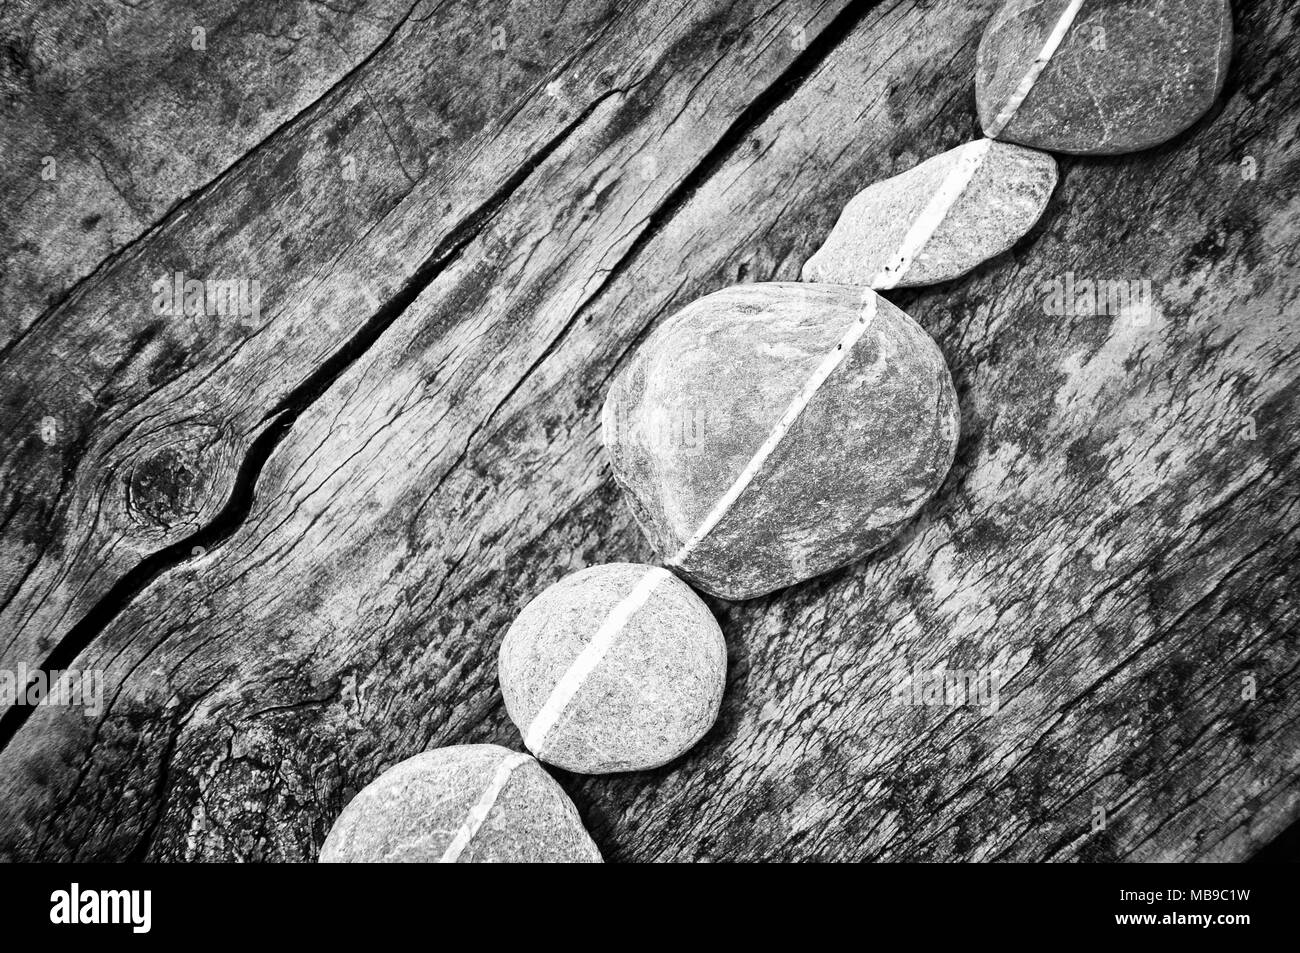 Row of stones on a wooden background, black and white Stock Photo